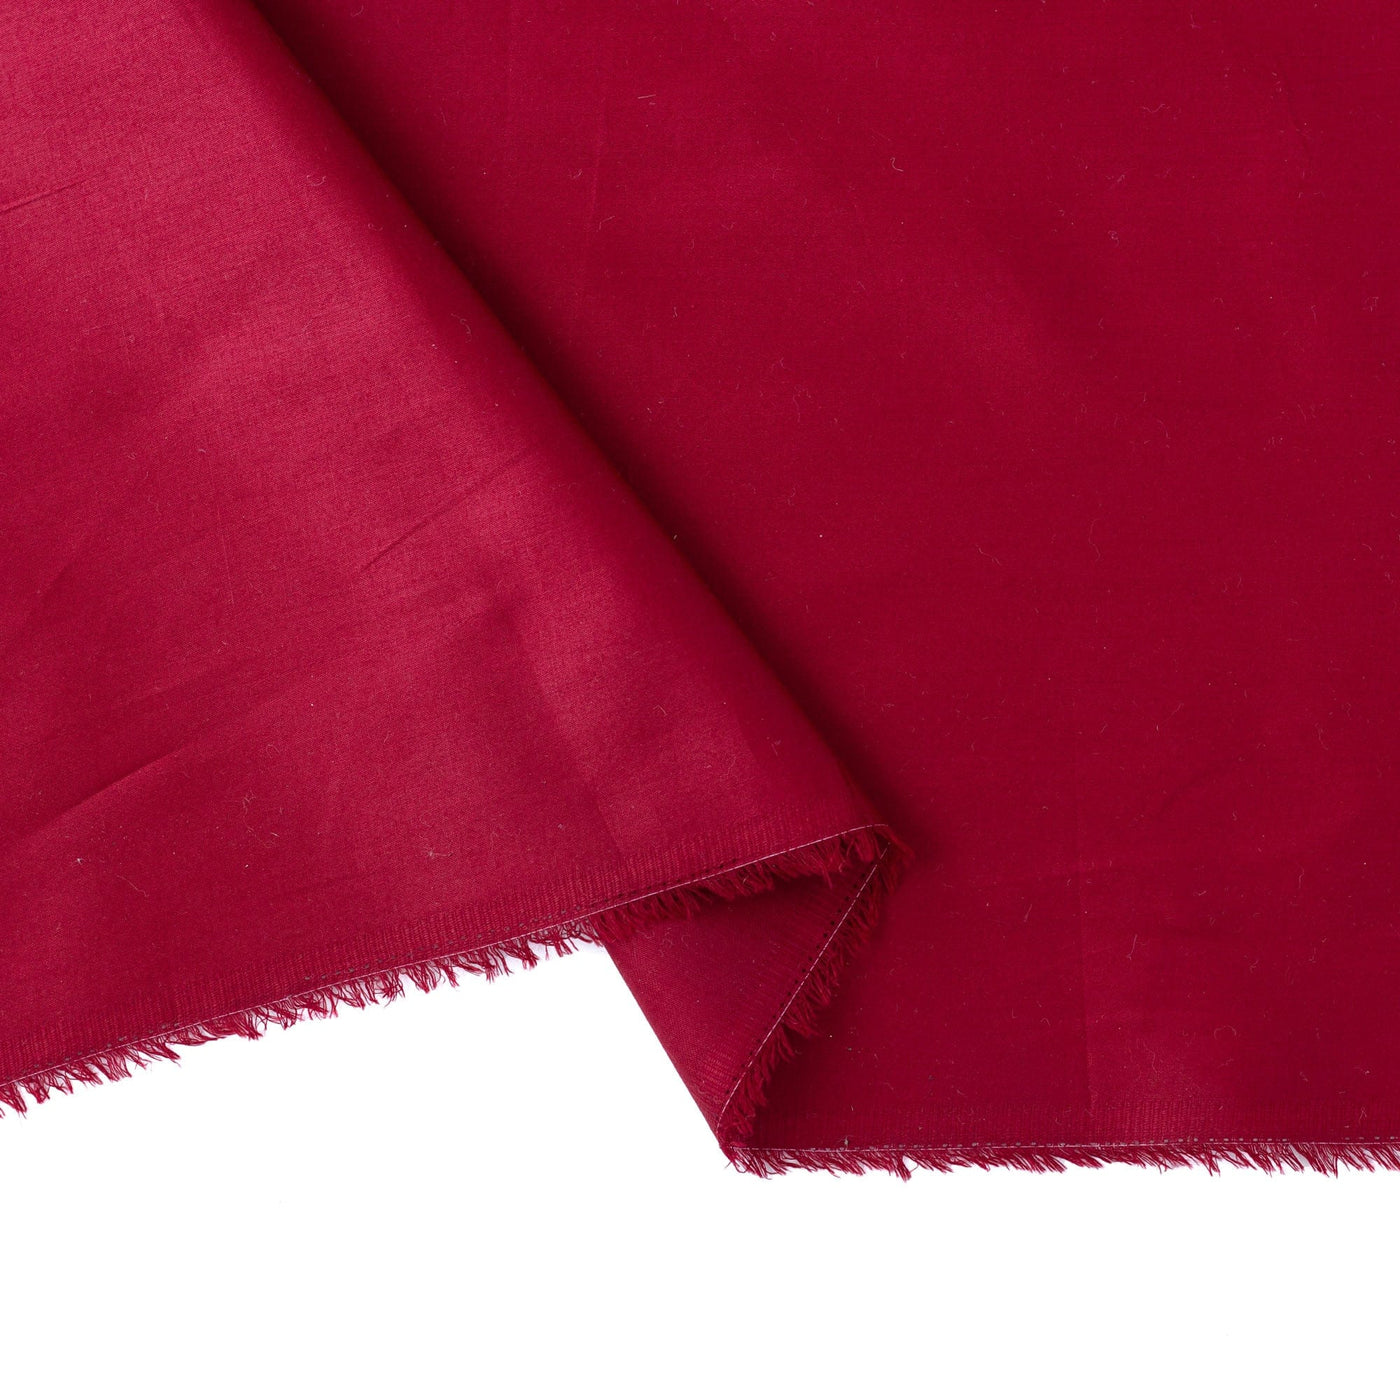 Fabric Pandit Fabric Deep Red Plain Cotton Satin Fabric (Width 42 Inches)